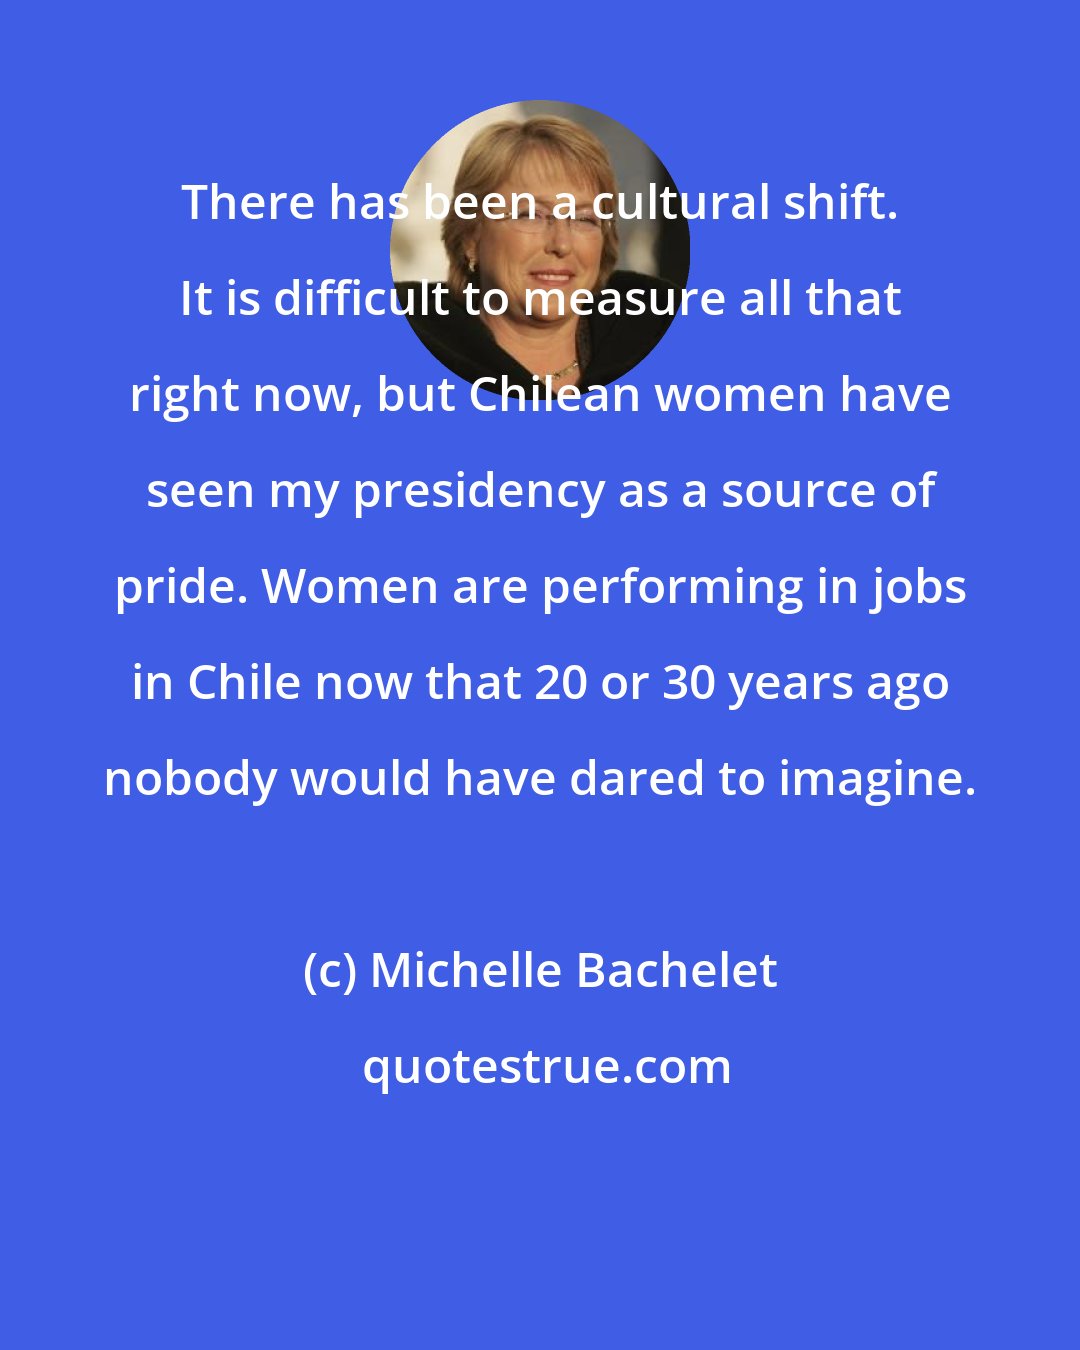 Michelle Bachelet: There has been a cultural shift. It is difficult to measure all that right now, but Chilean women have seen my presidency as a source of pride. Women are performing in jobs in Chile now that 20 or 30 years ago nobody would have dared to imagine.